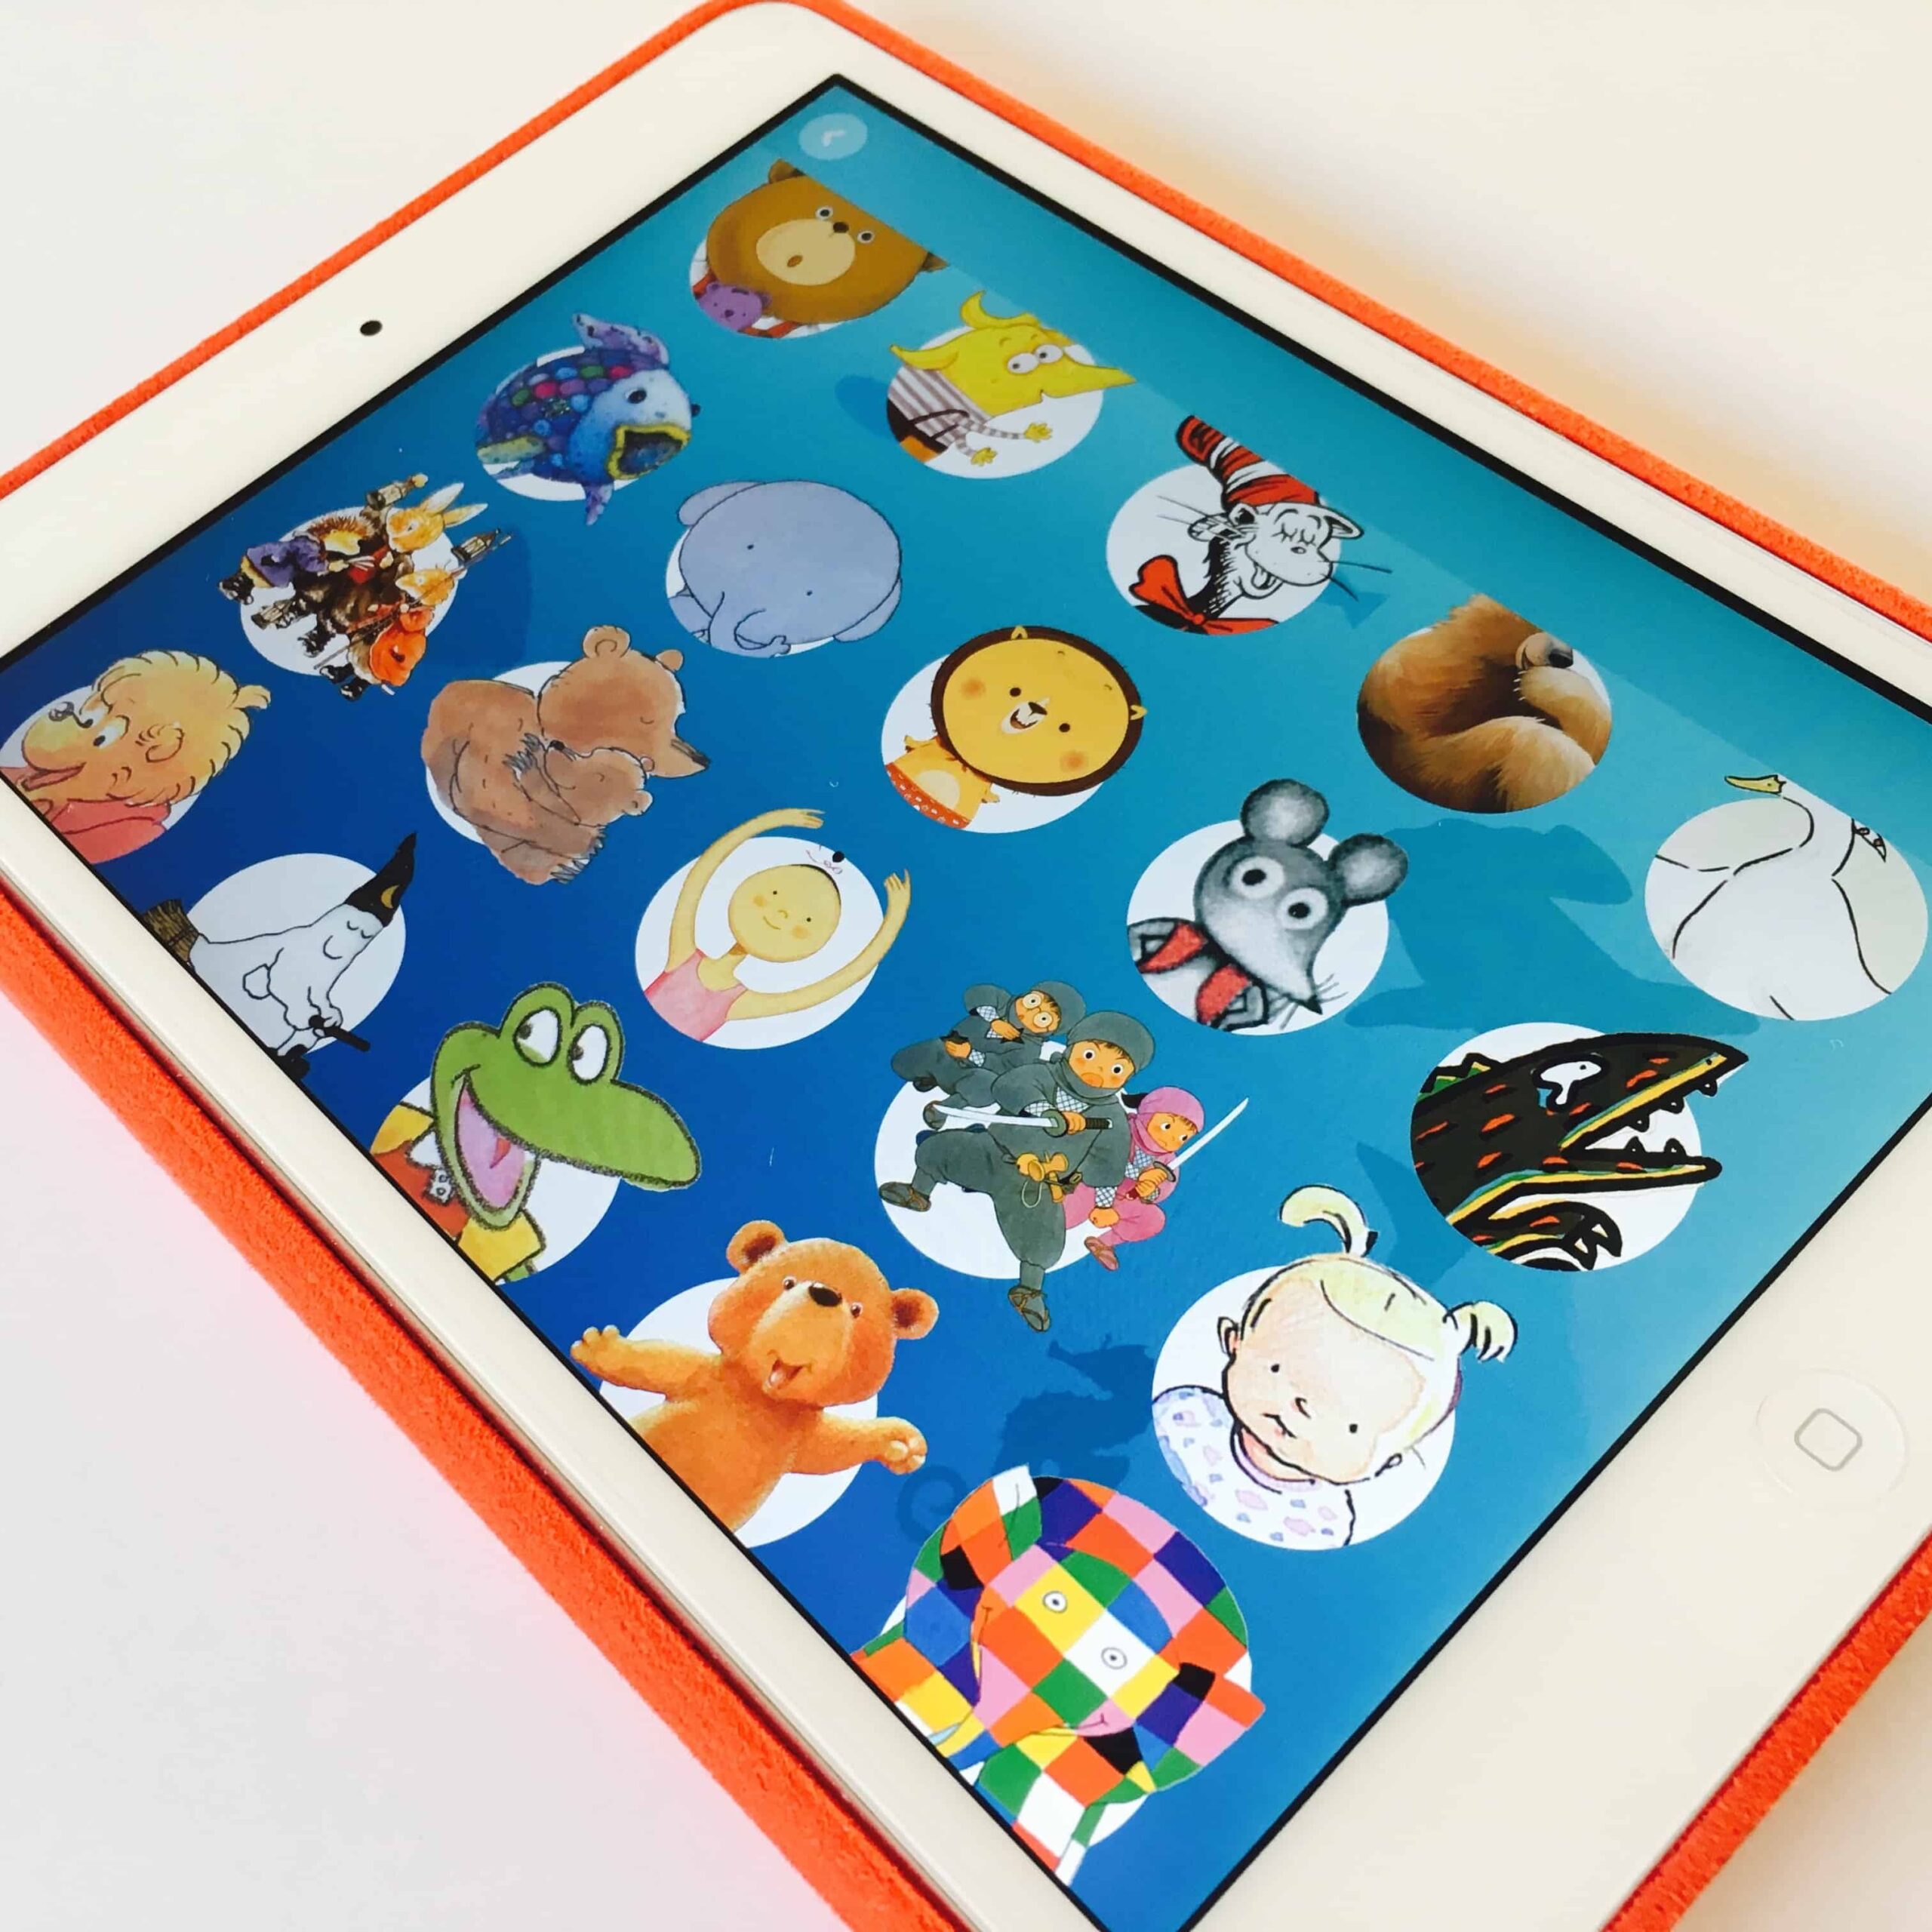 20 Best Chinese Apps for Kids: Books, Math, Reading, Writing, and More